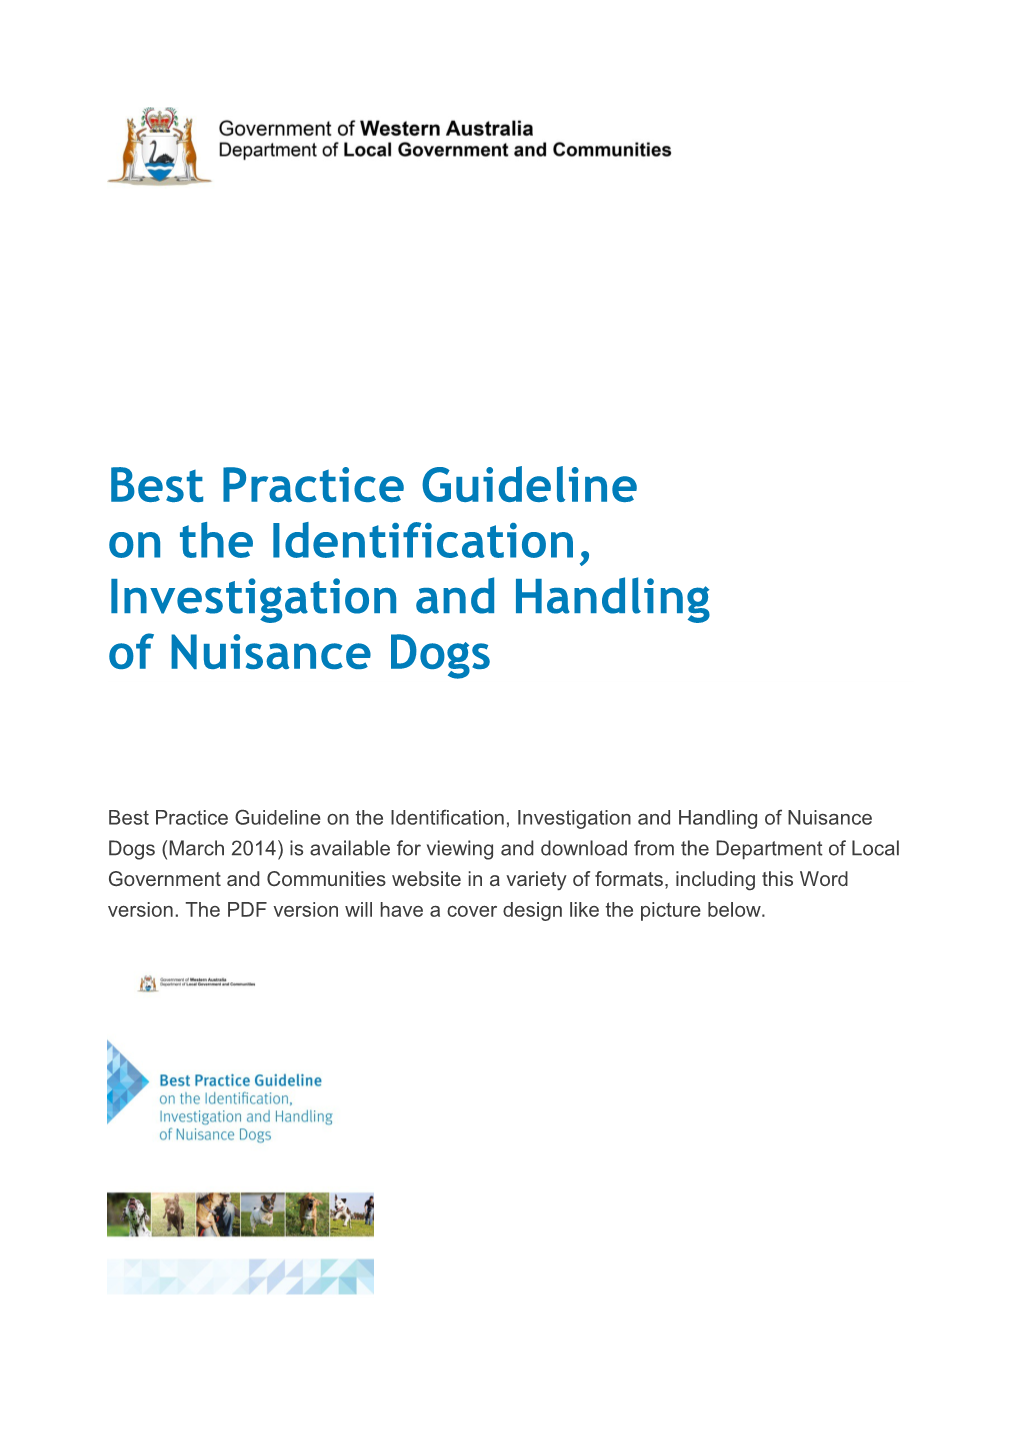 Best Practice Guideline on the Identification, Investigation and Handling of Nuisance Dogs